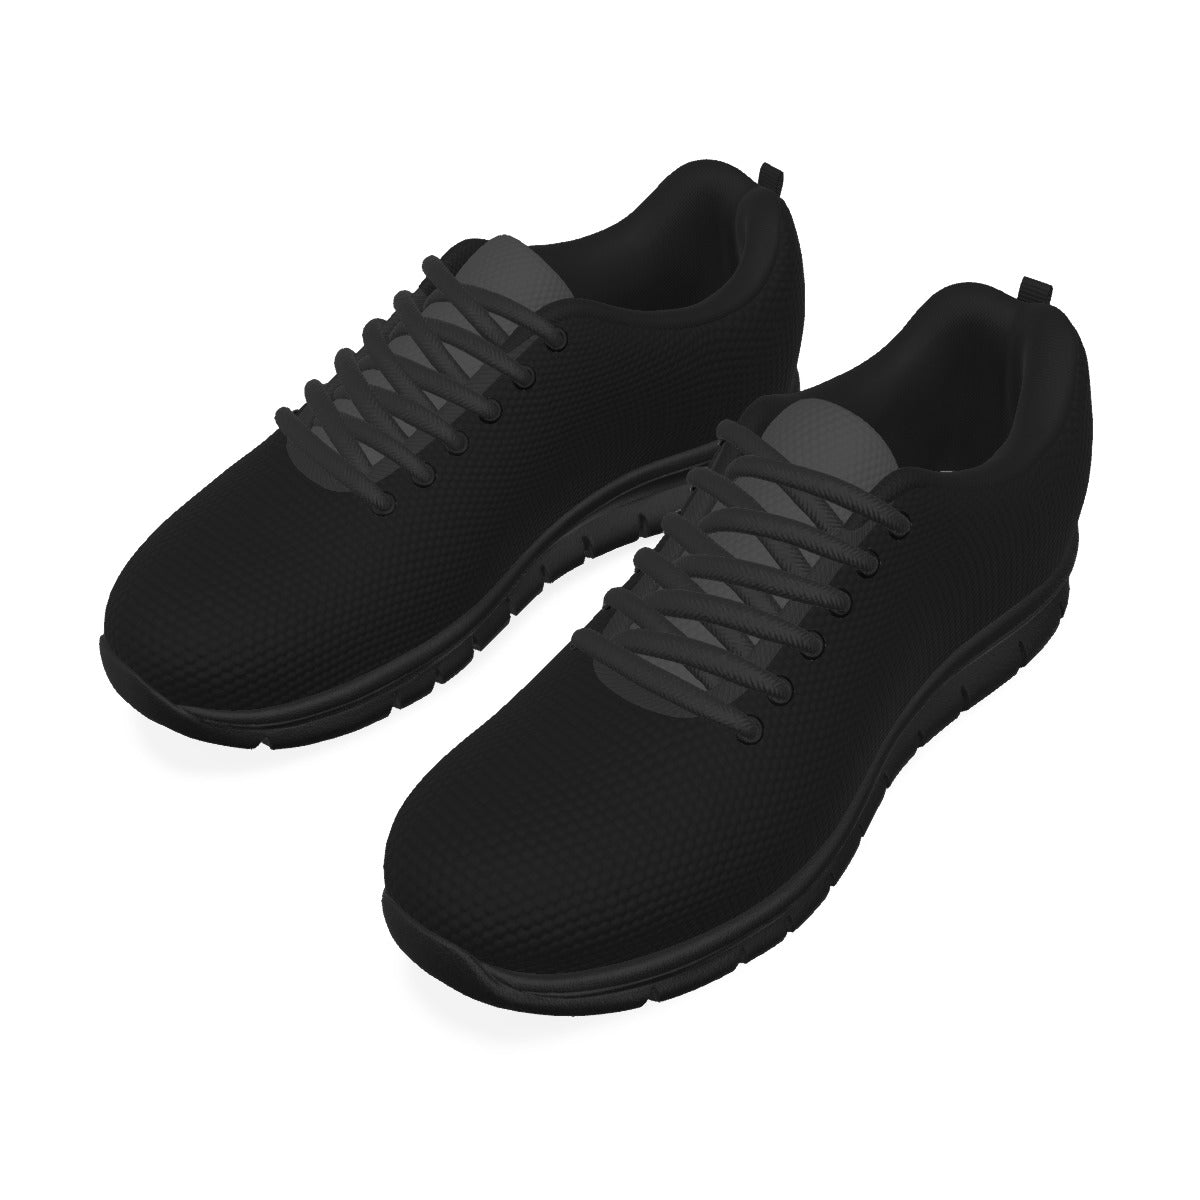 Men's Yoga Shoes - Breathable and Soft Fabric - Personal Hour for Yoga and Meditations 